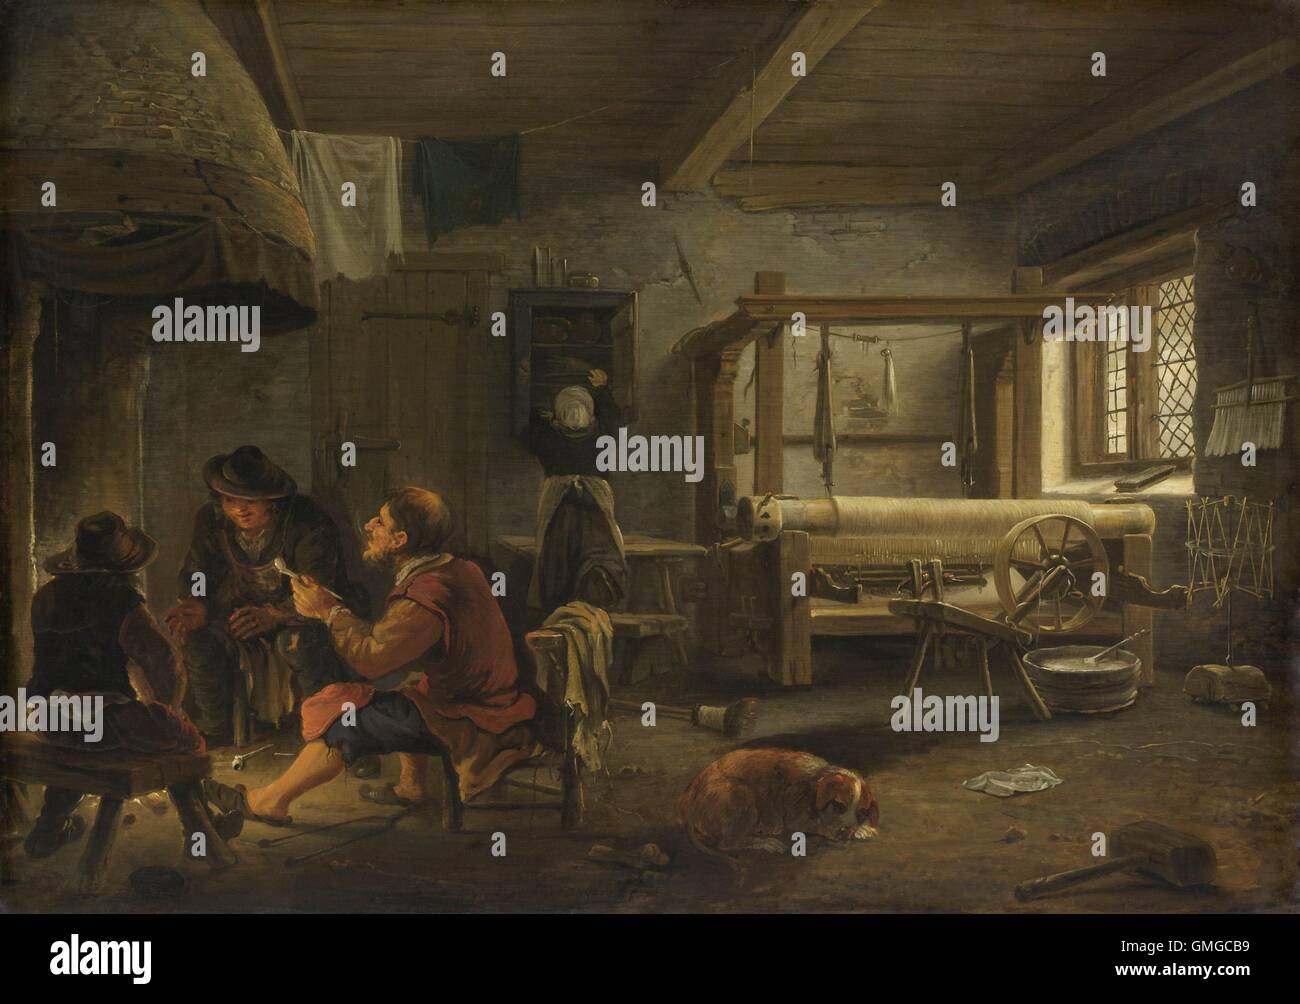 A Weaver's Workshop, by Johannes van Oudenrogge, 1652, Dutch painting, oil on panel. Interior of a weaving shop, with three men Stock Photo